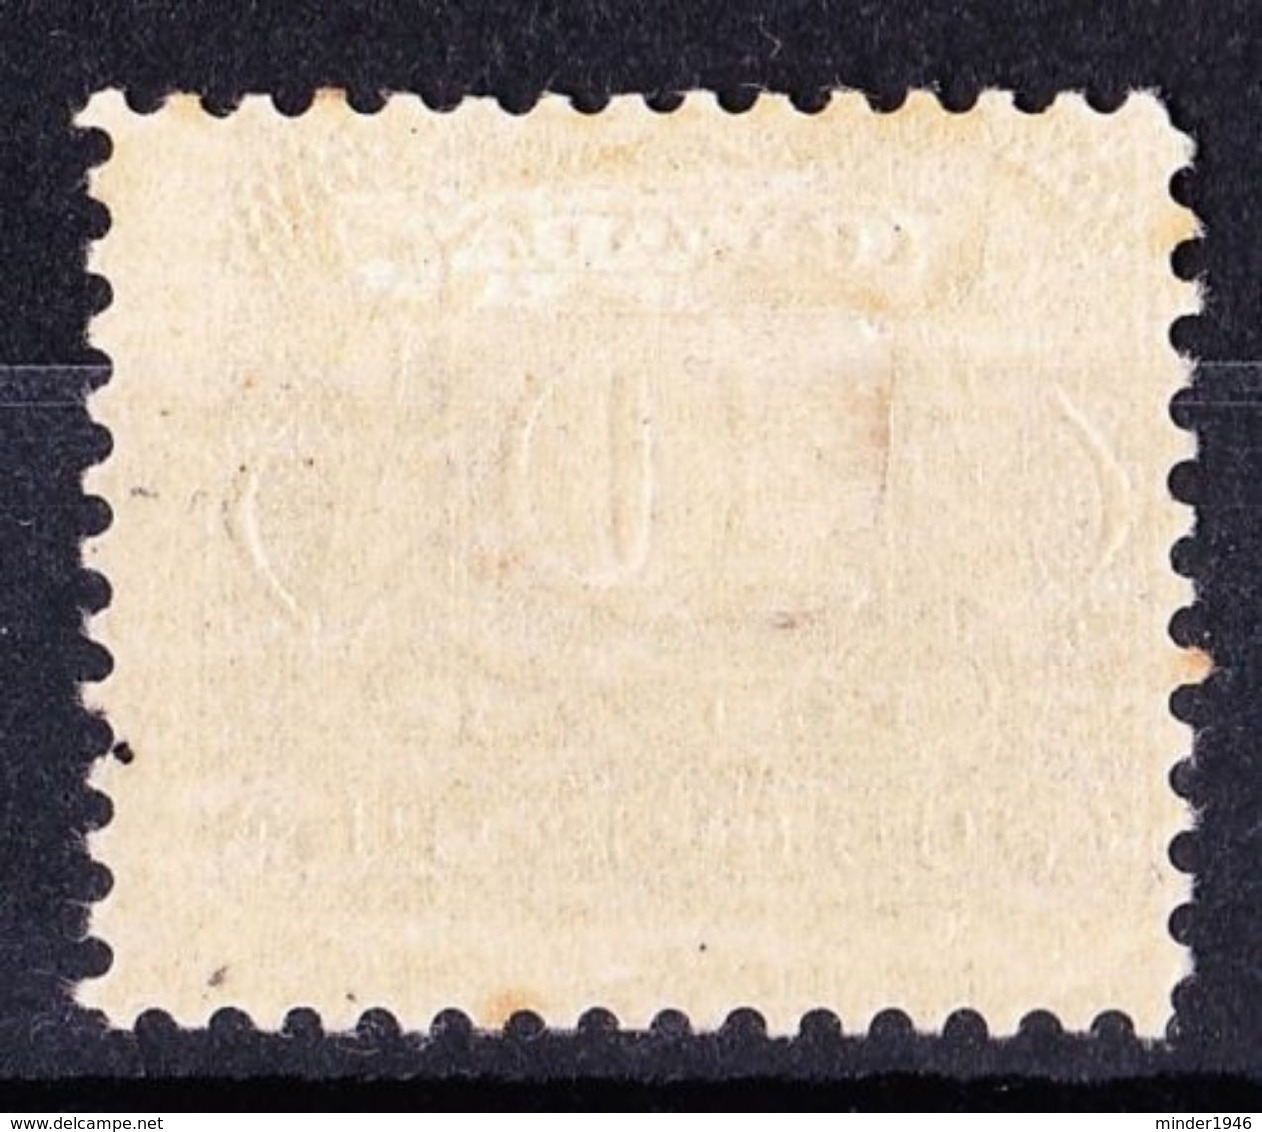 CANADA 1932 KGV 10c Postage Due Bright Violet SGD13 MH Cv £65 - Postage Due